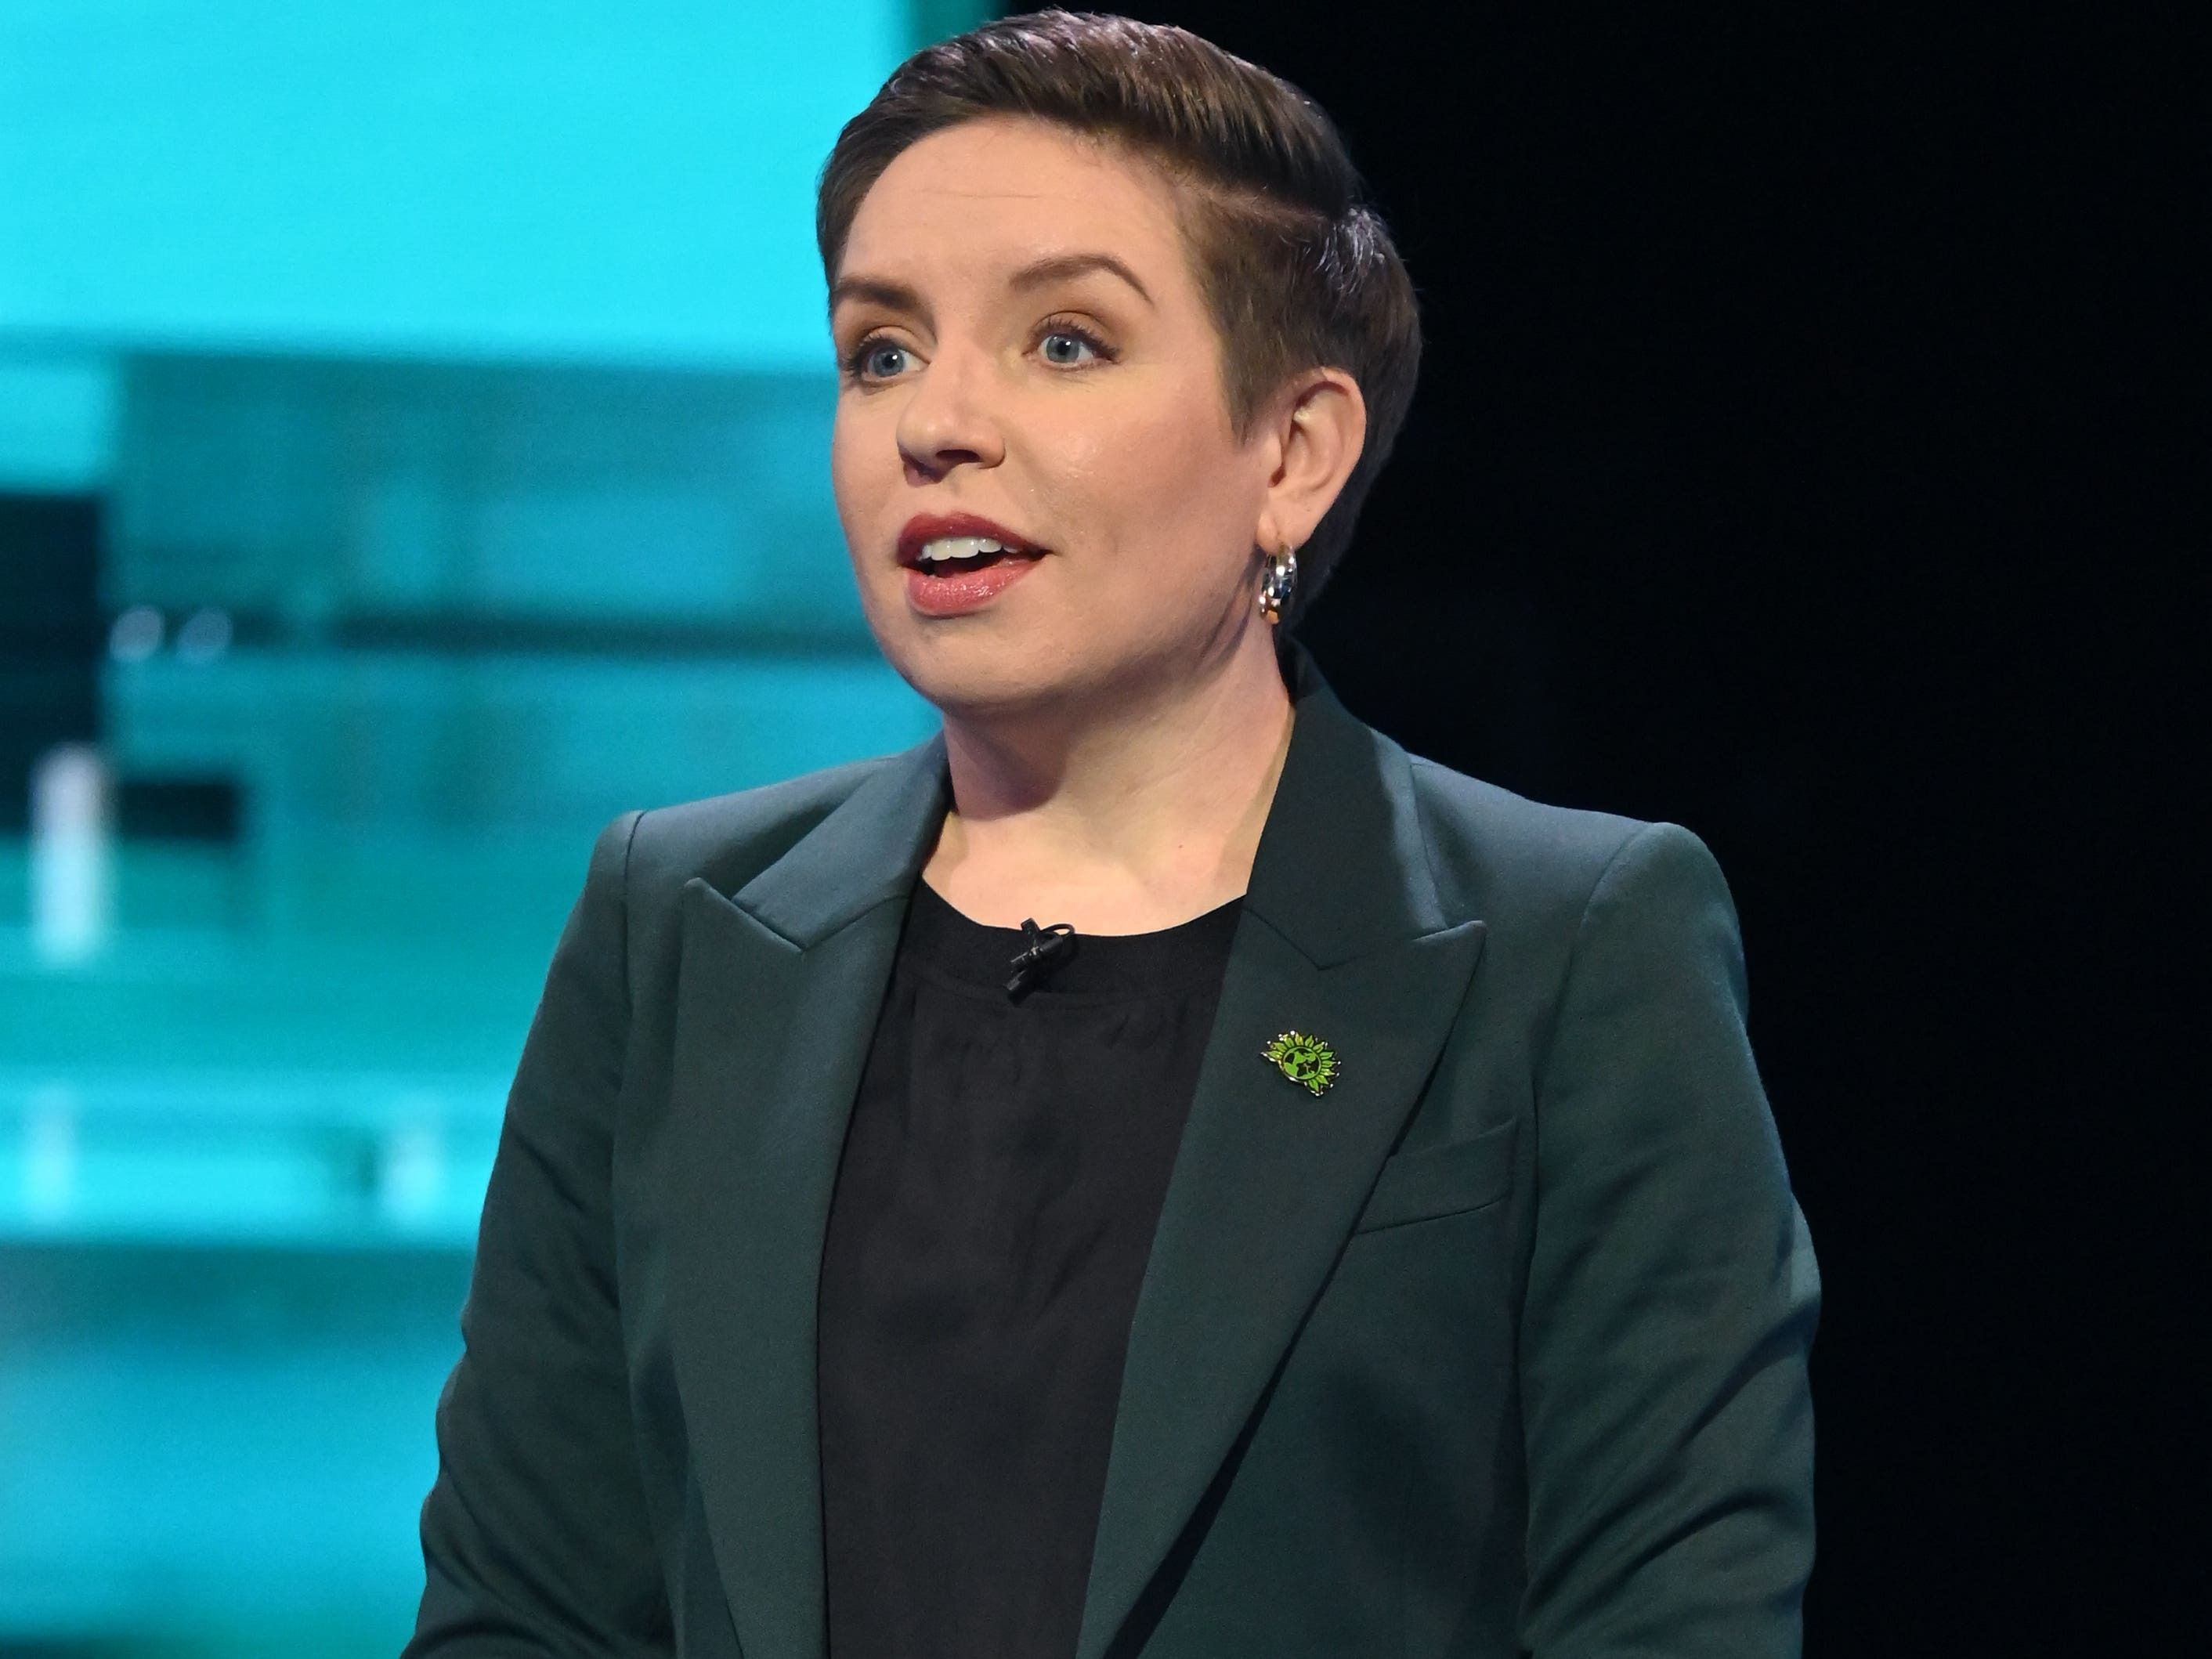 Green co-leader accuses opponents of not ‘being honest enough’ about NHS